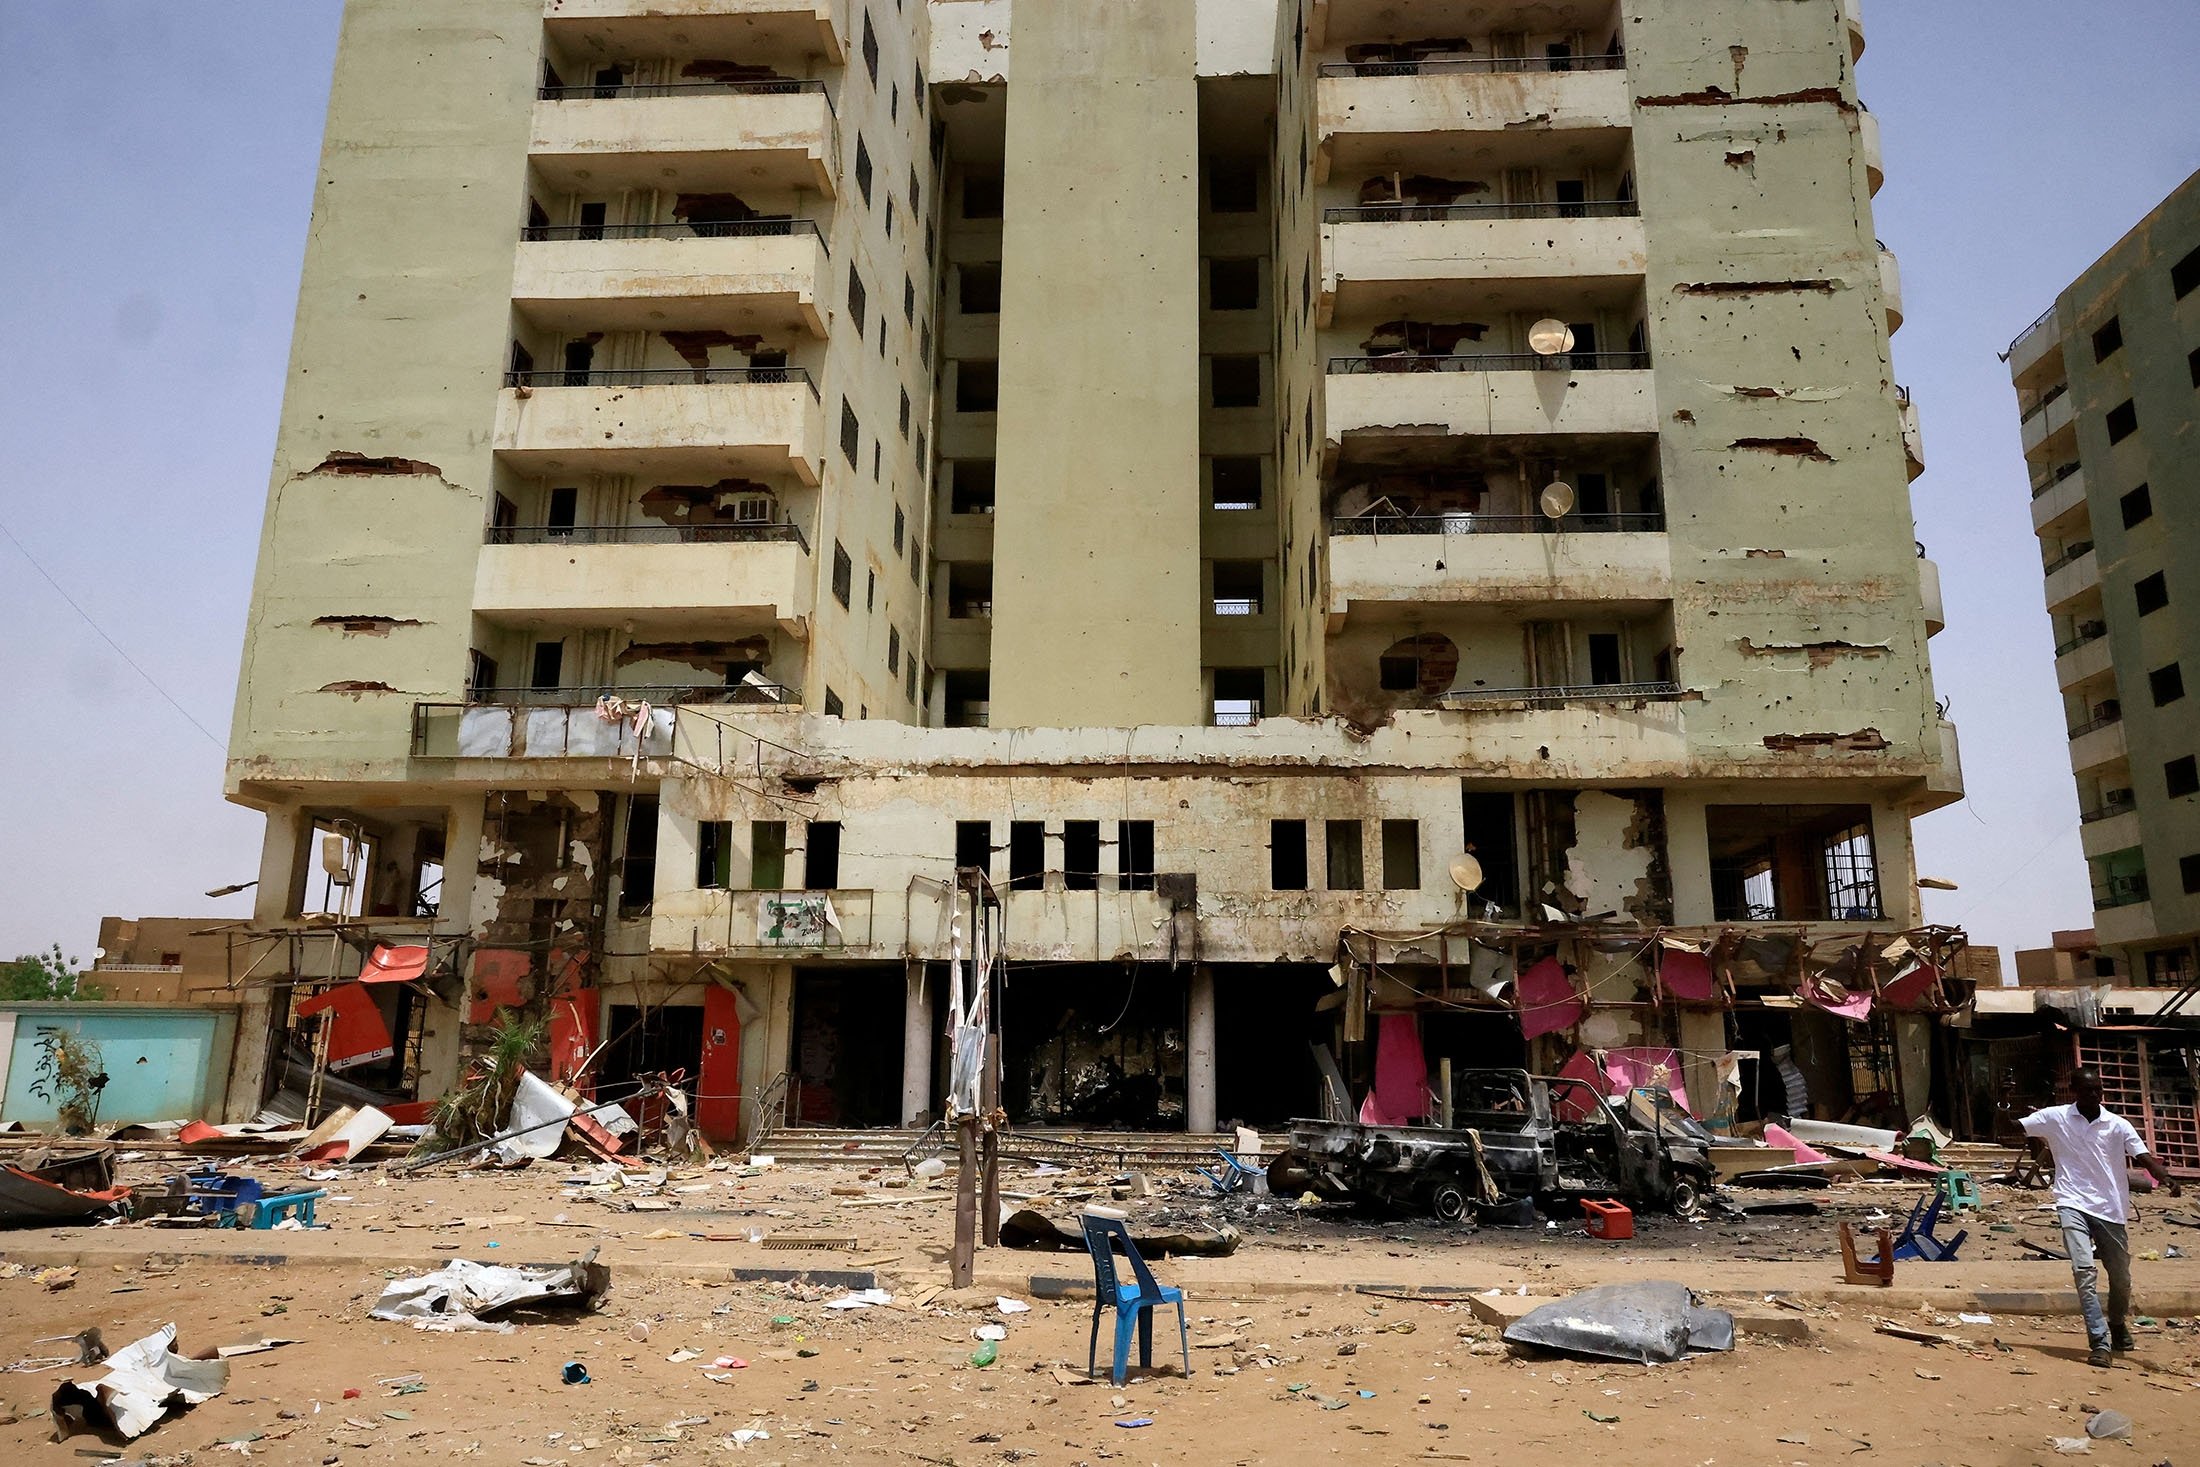 A man walks near a damaged car and buildings at the central market during clashes between the paramilitary Rapid Support Forces and the army in Khartoum, Sudan, April 27, 2023. (Reuters Photo)